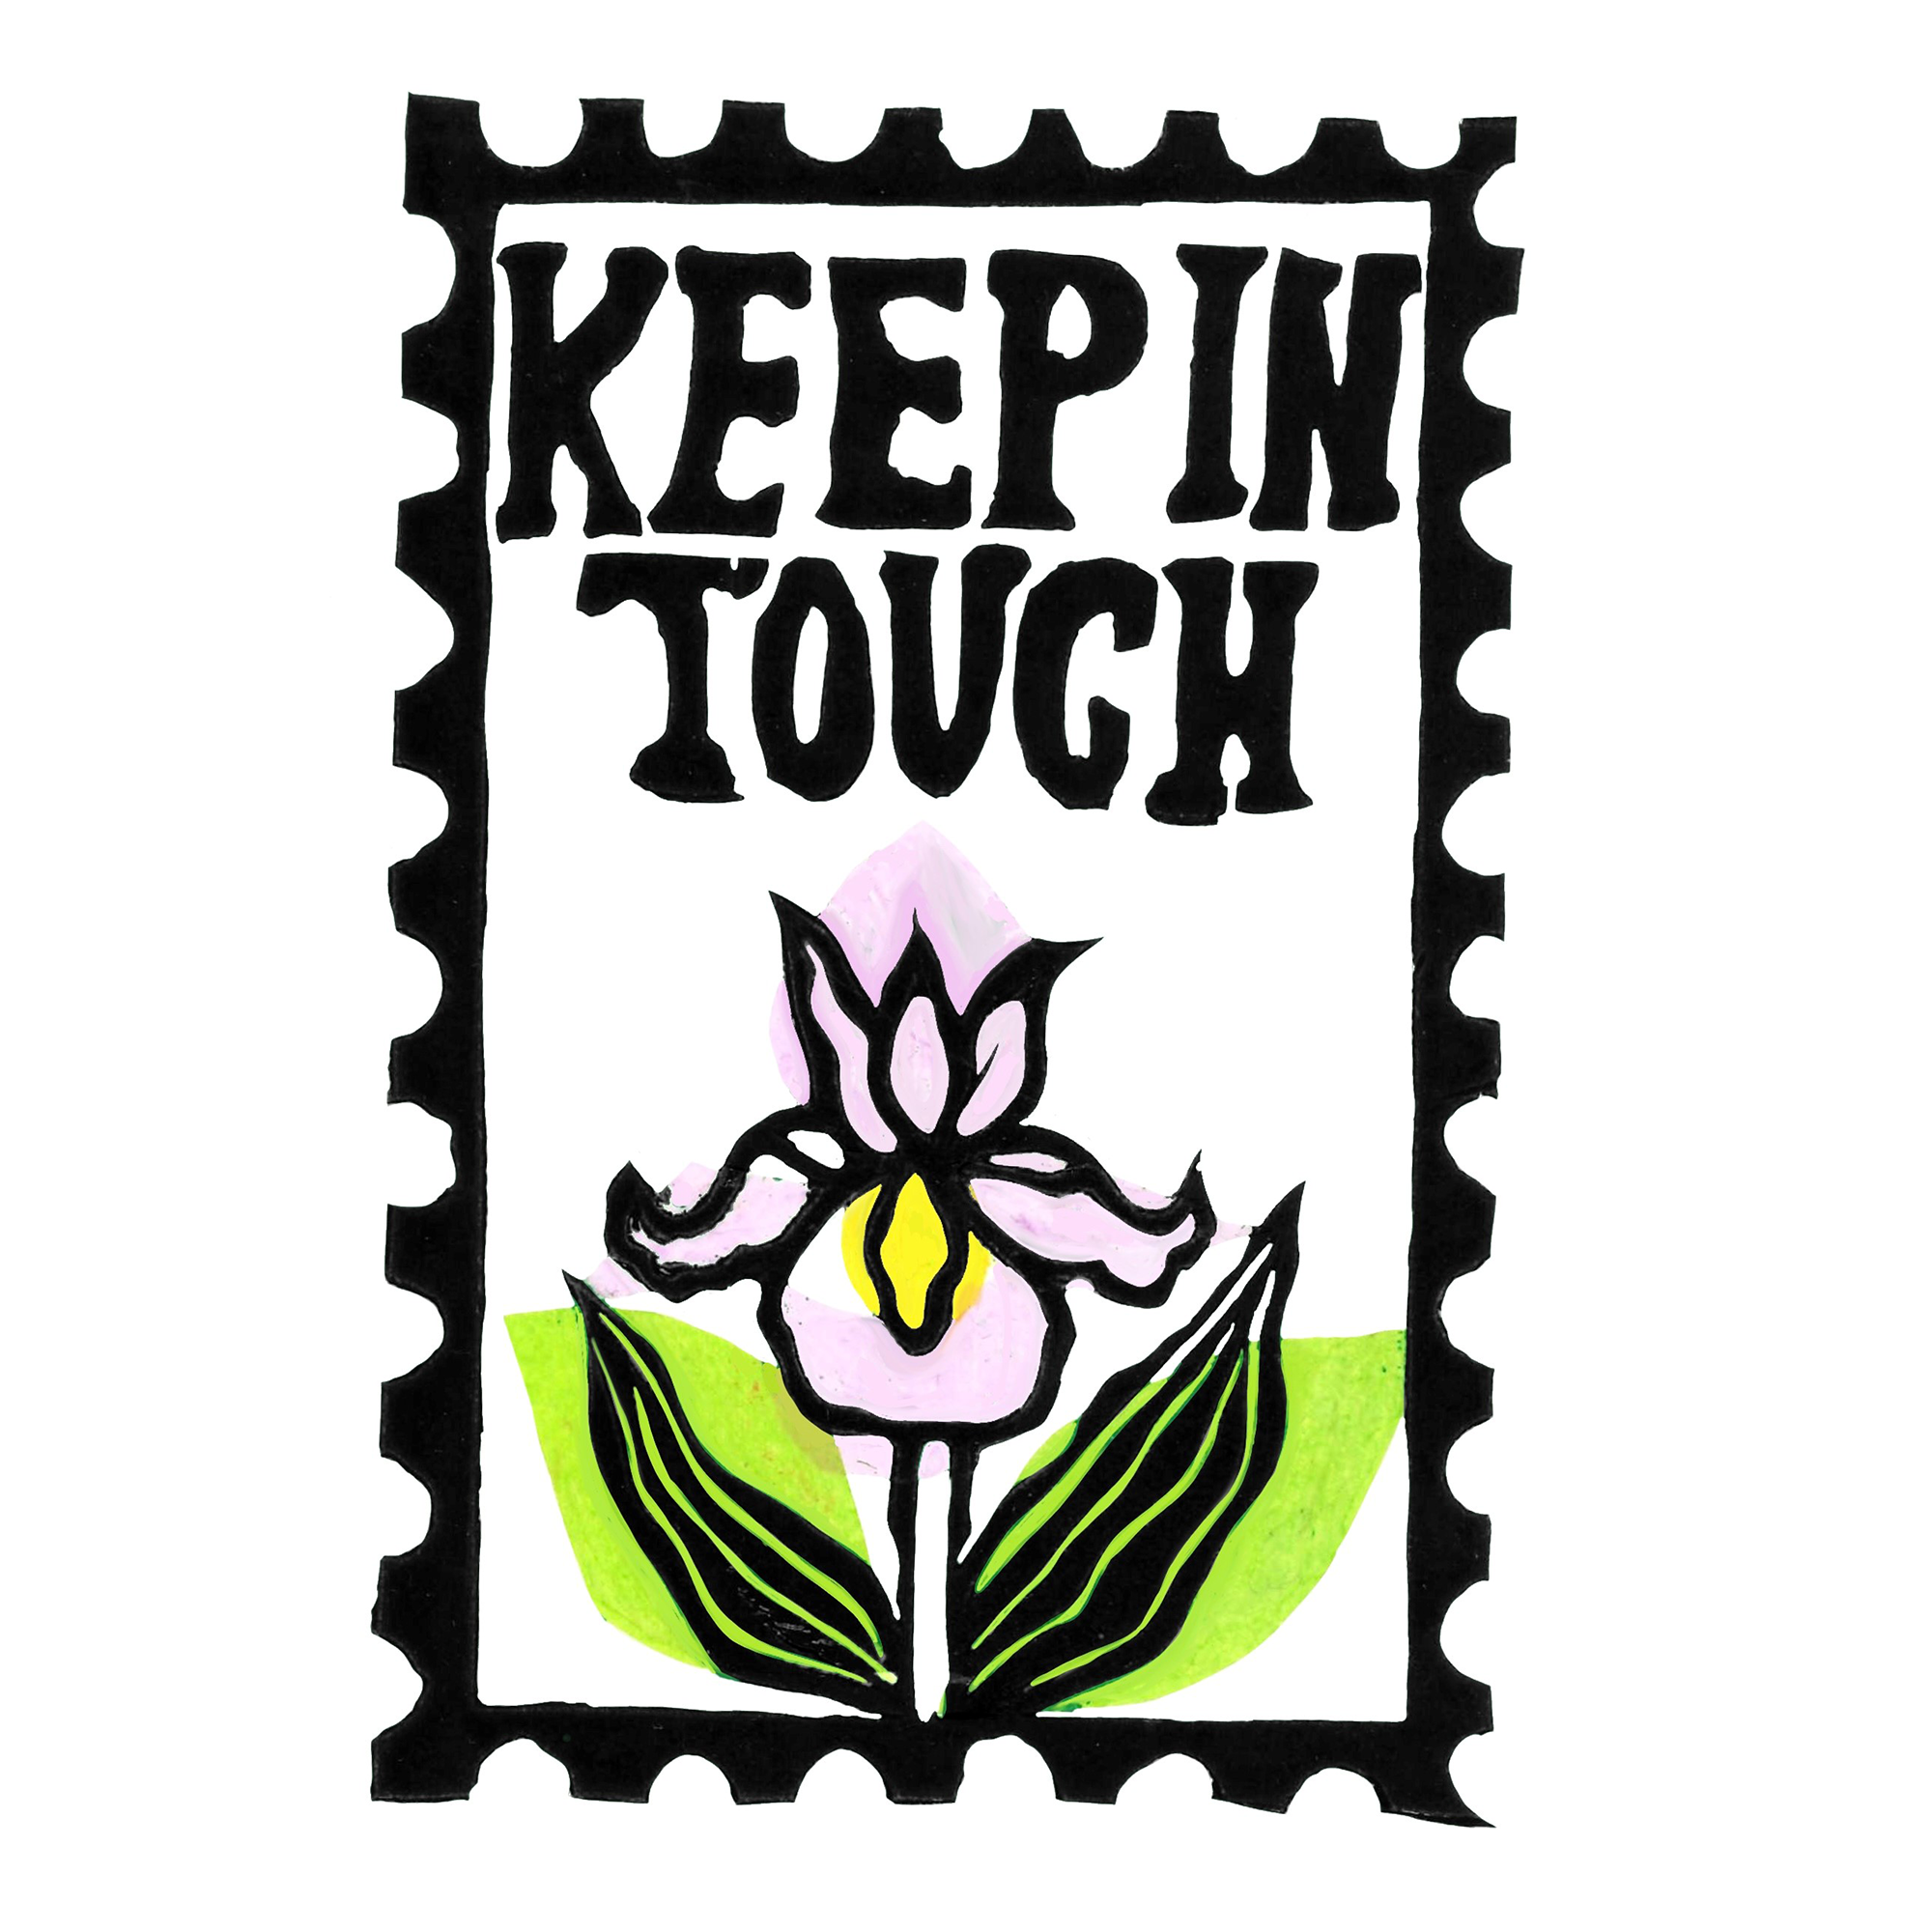 Lino print by Madison Powlesland of a postage stamp- shaped logo containing an Iris flower and text reading 'Keep In Touch'.